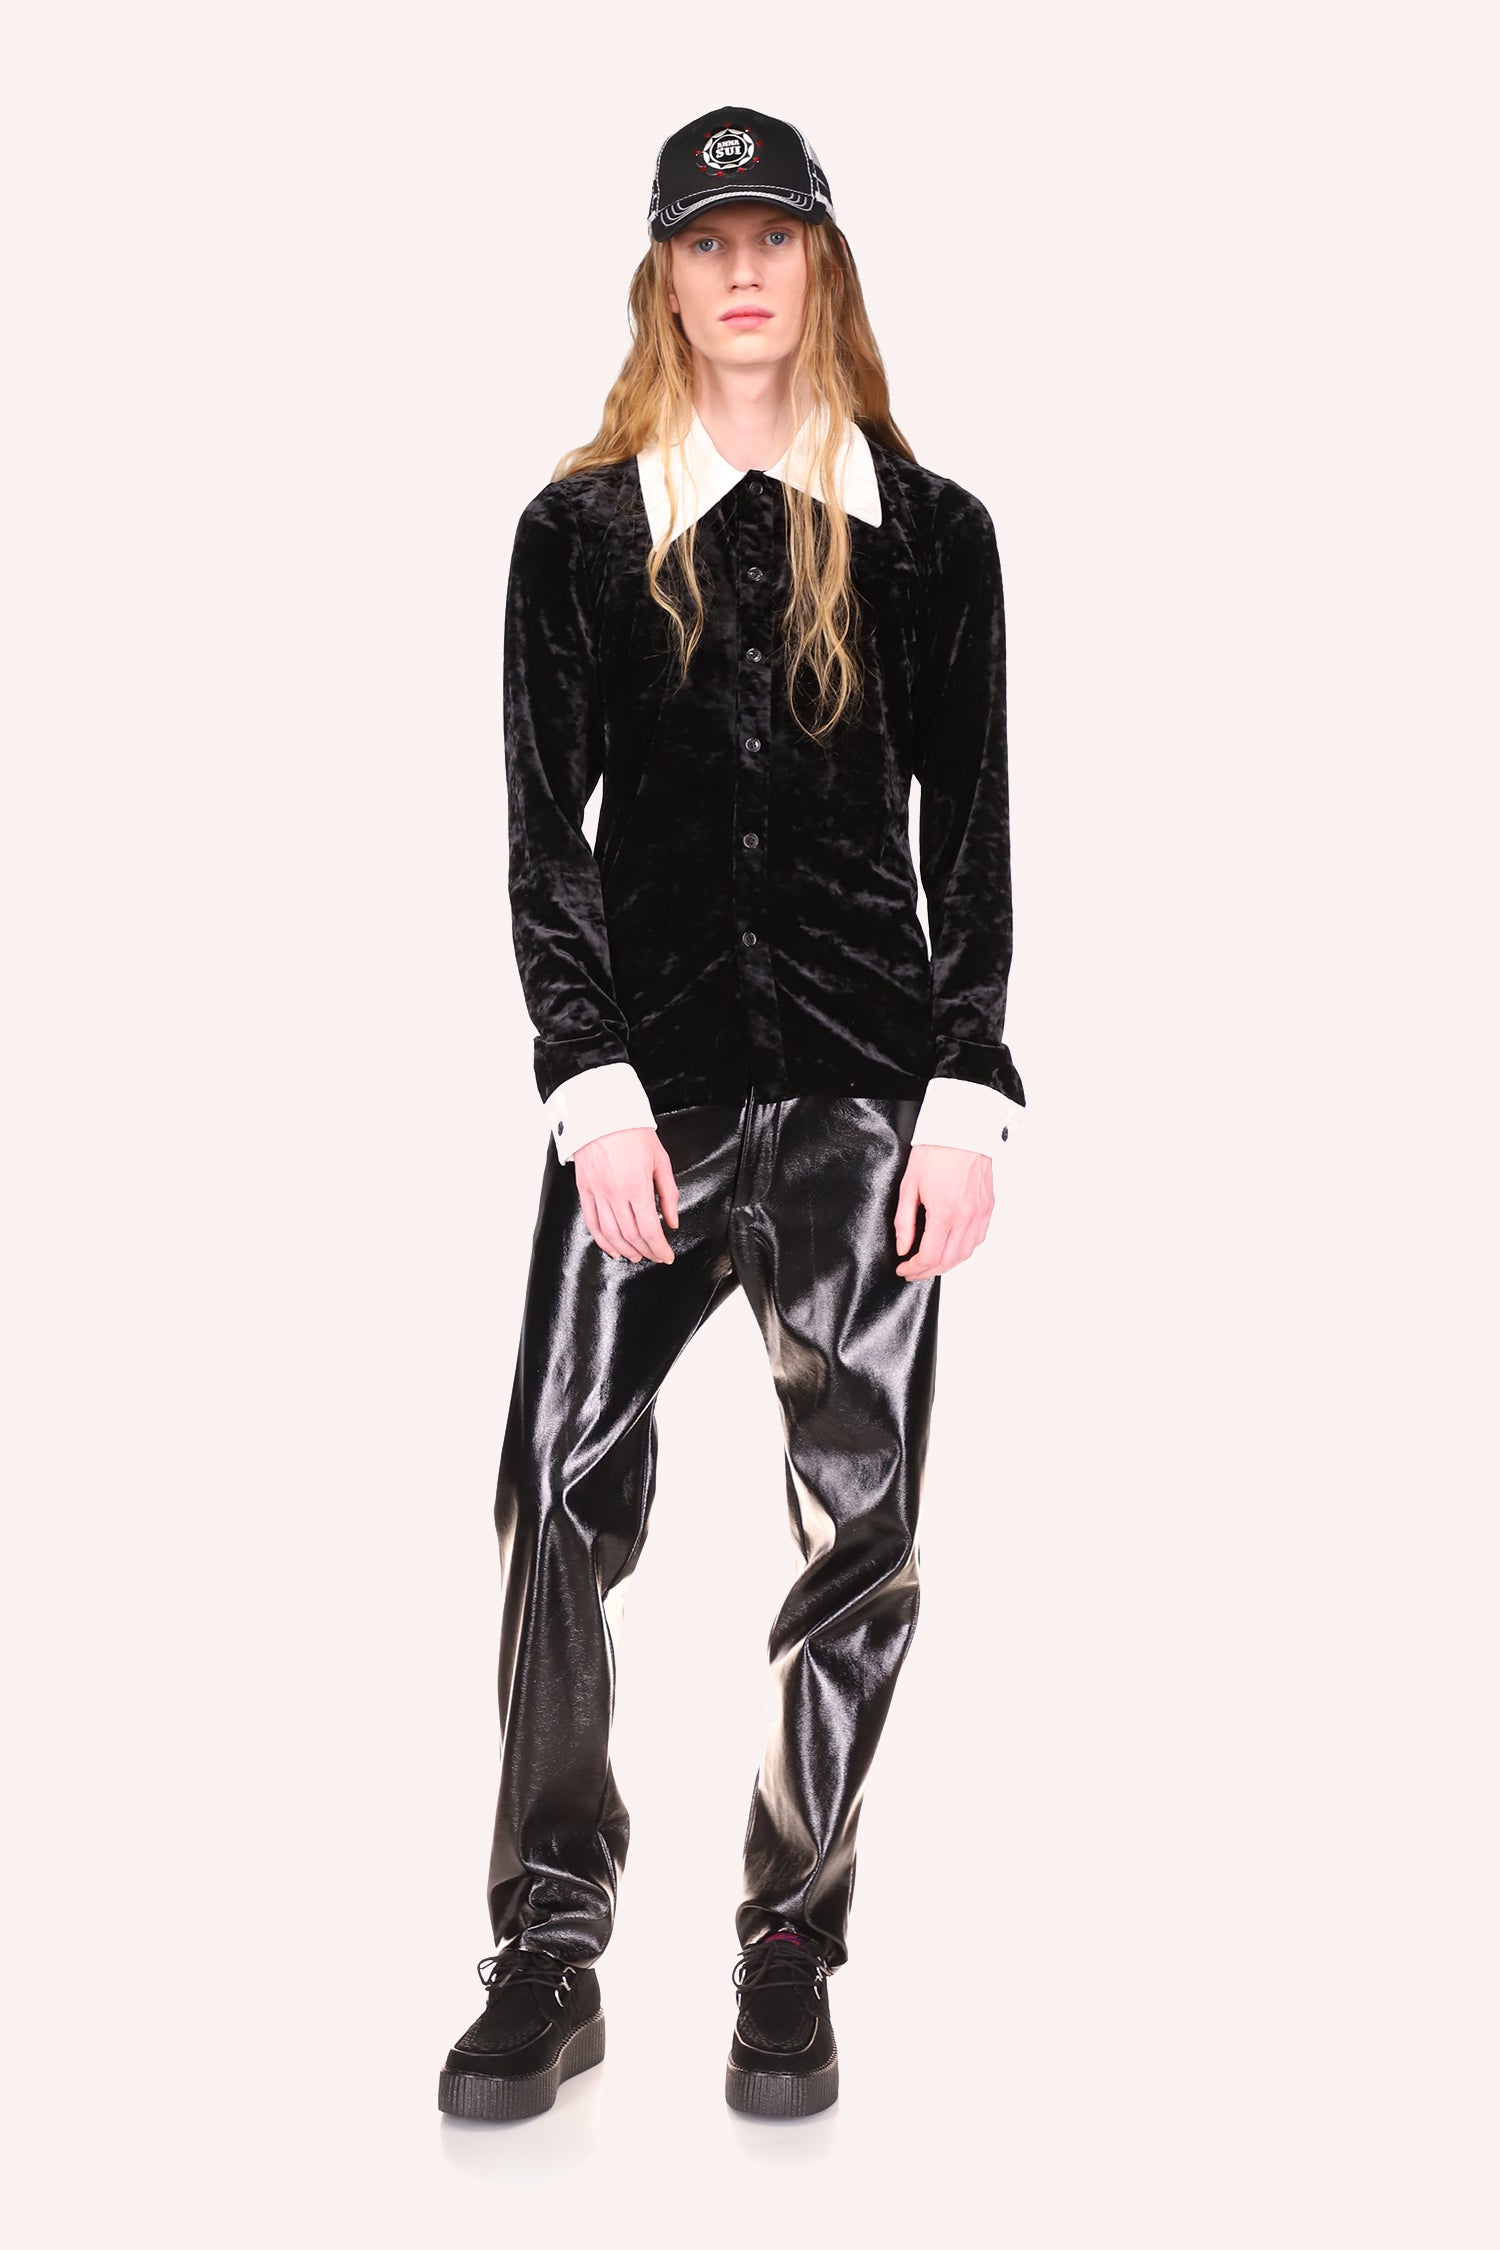 Stretch shiny Velvet, with 6-buttons Black, hips long, large white collar, and white handhold